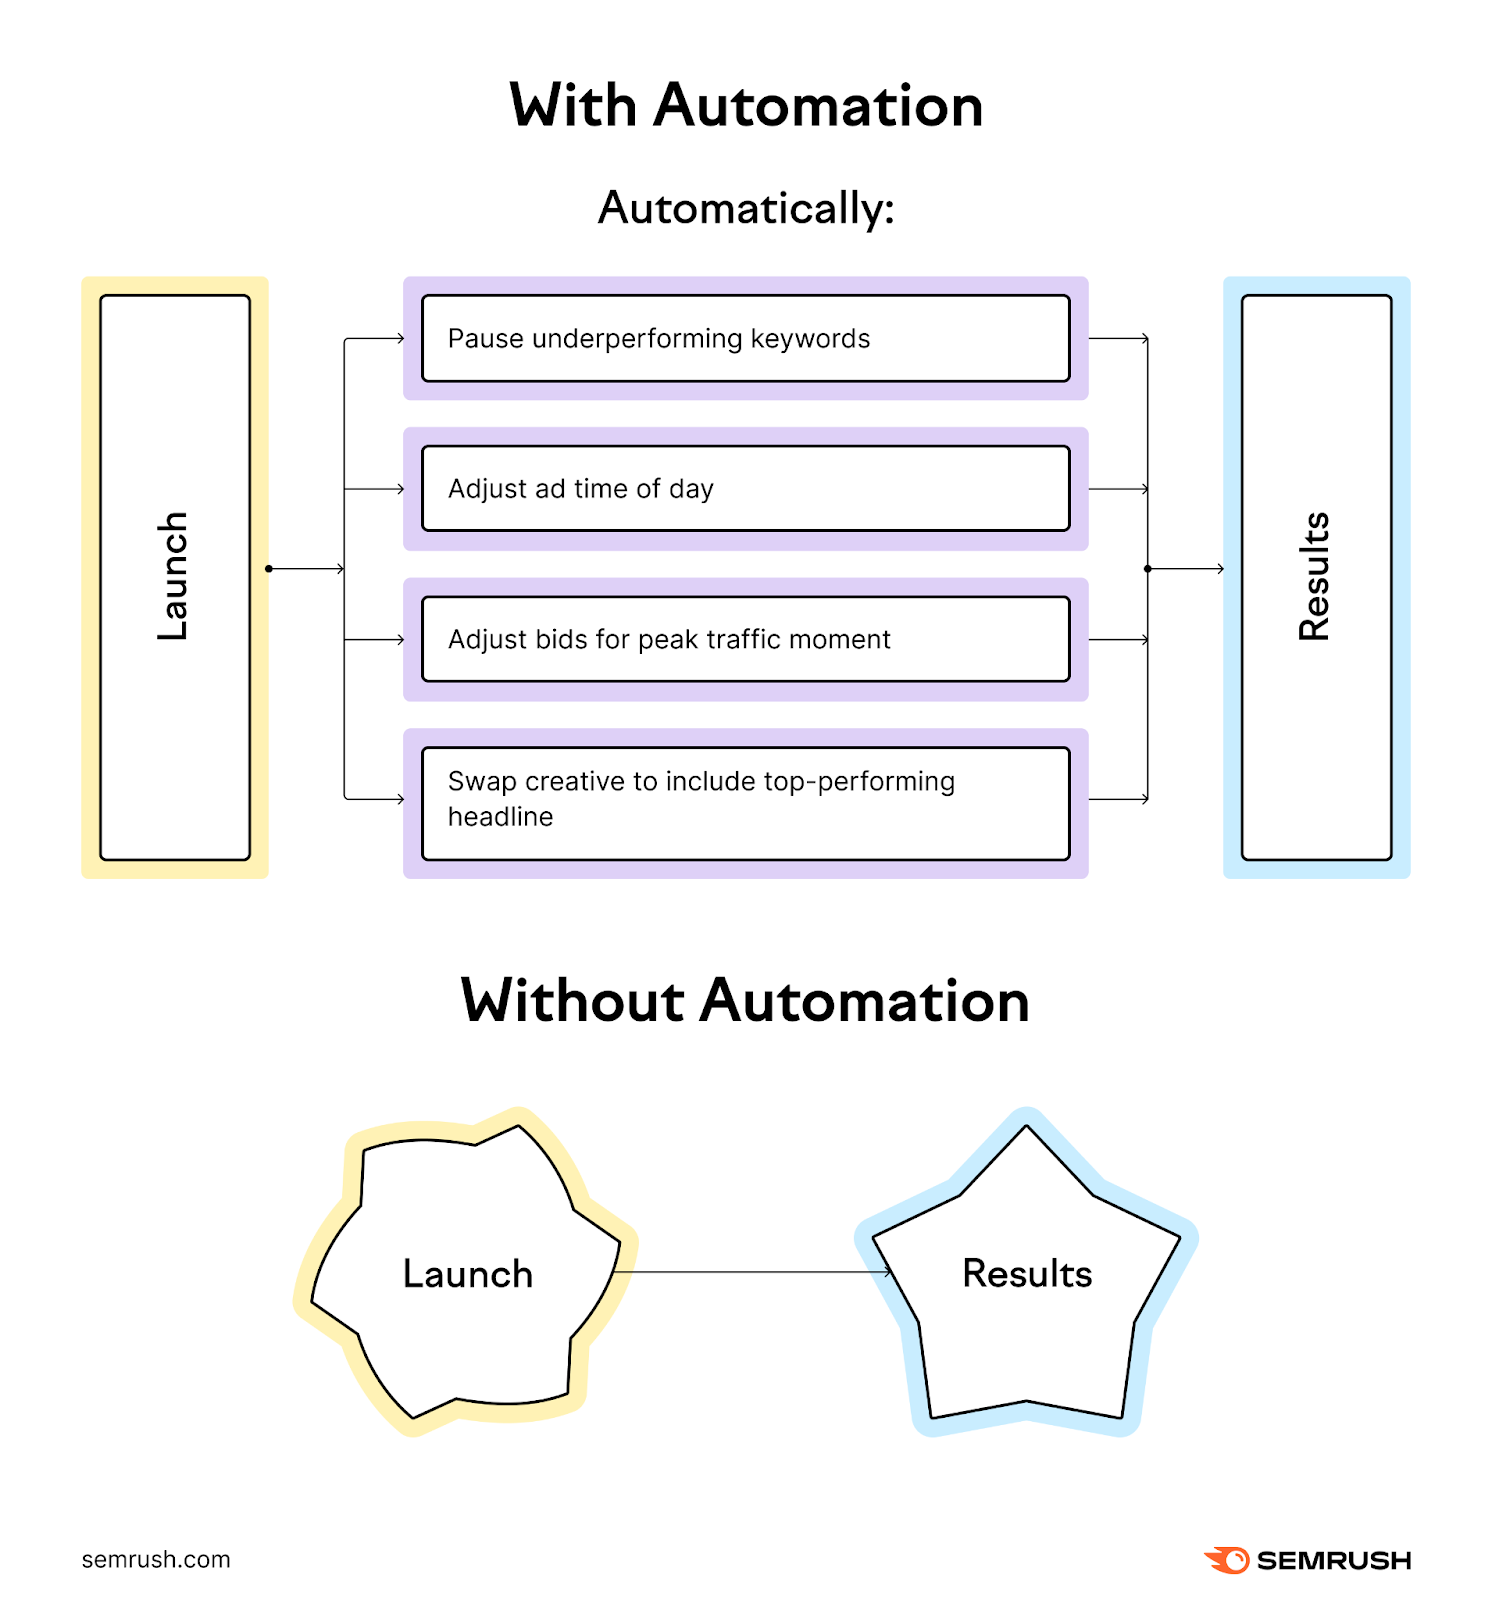 An infographic showing the process with and without PPC ad automation